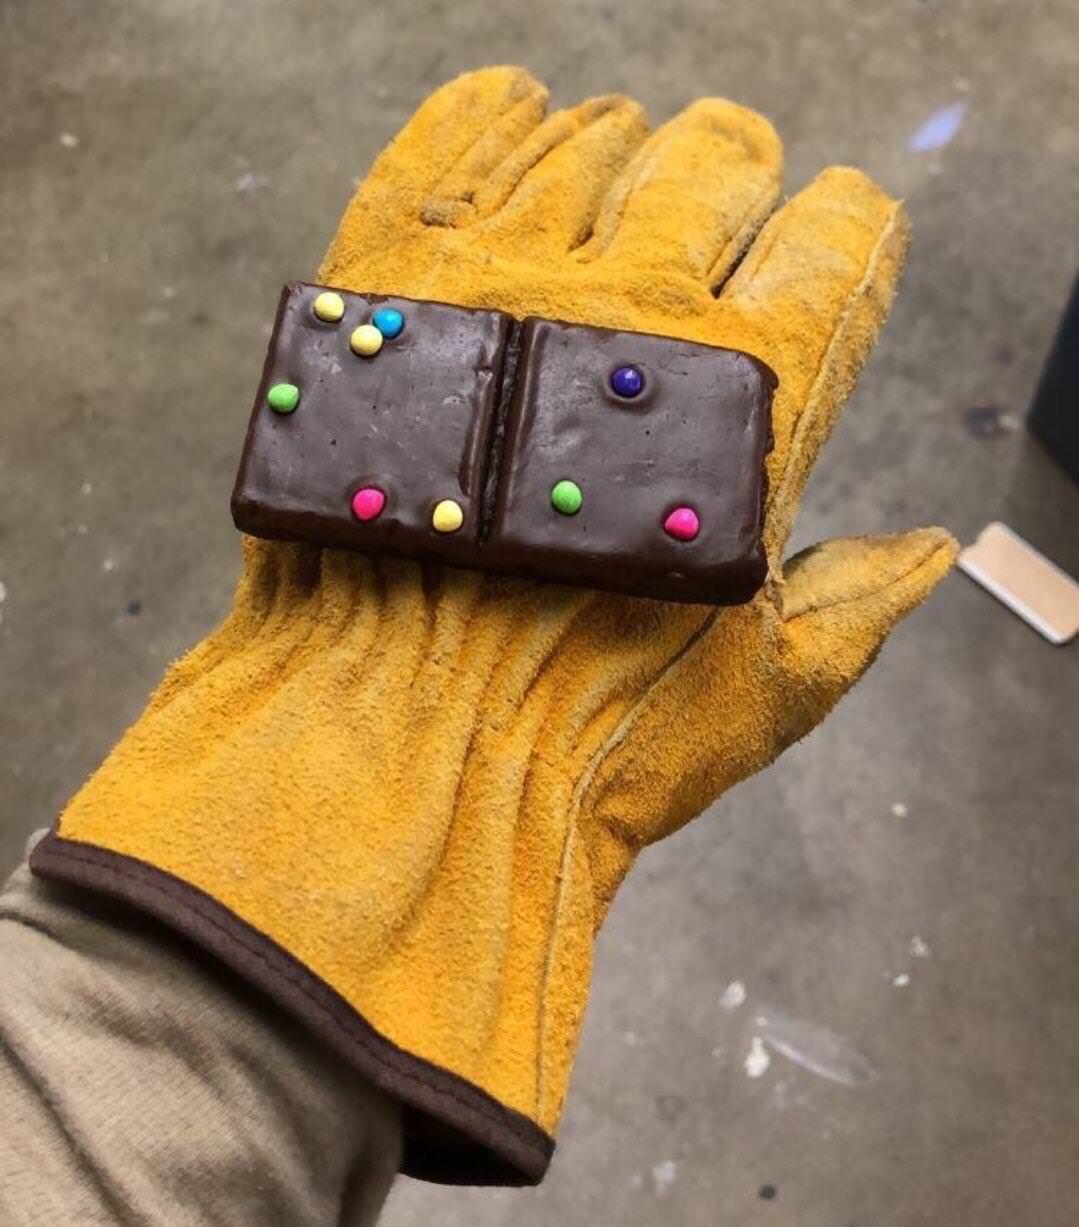 Infinity gauntlet made of a cosmic brownies on a yellow glove